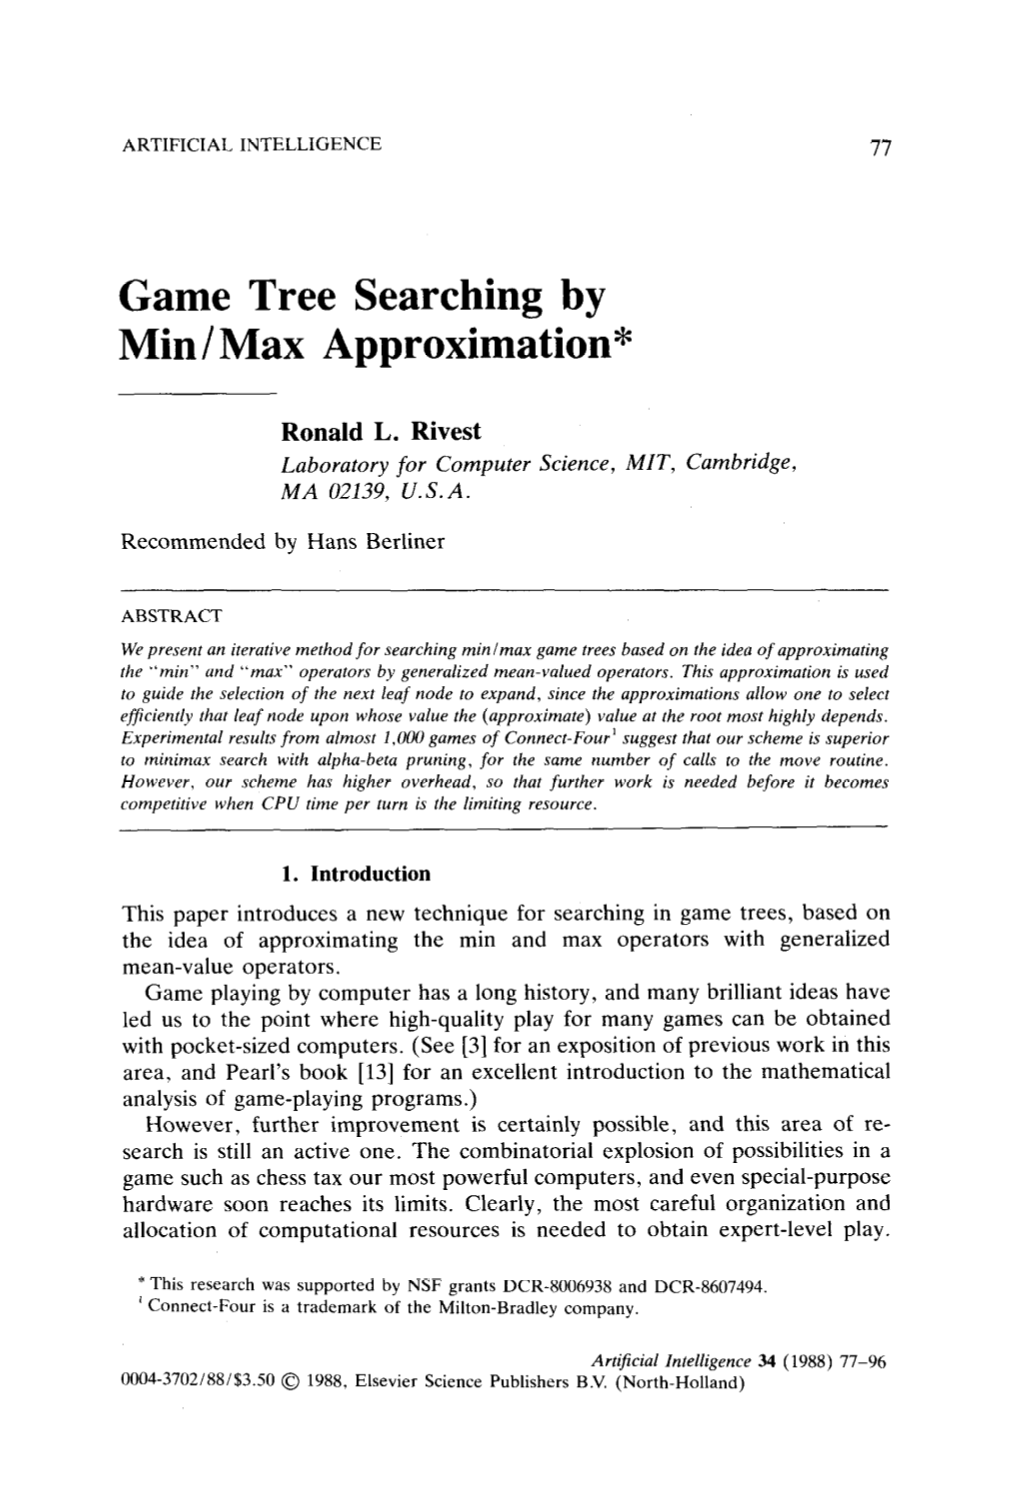 Game Tree Searching by Min / Max Approximation*